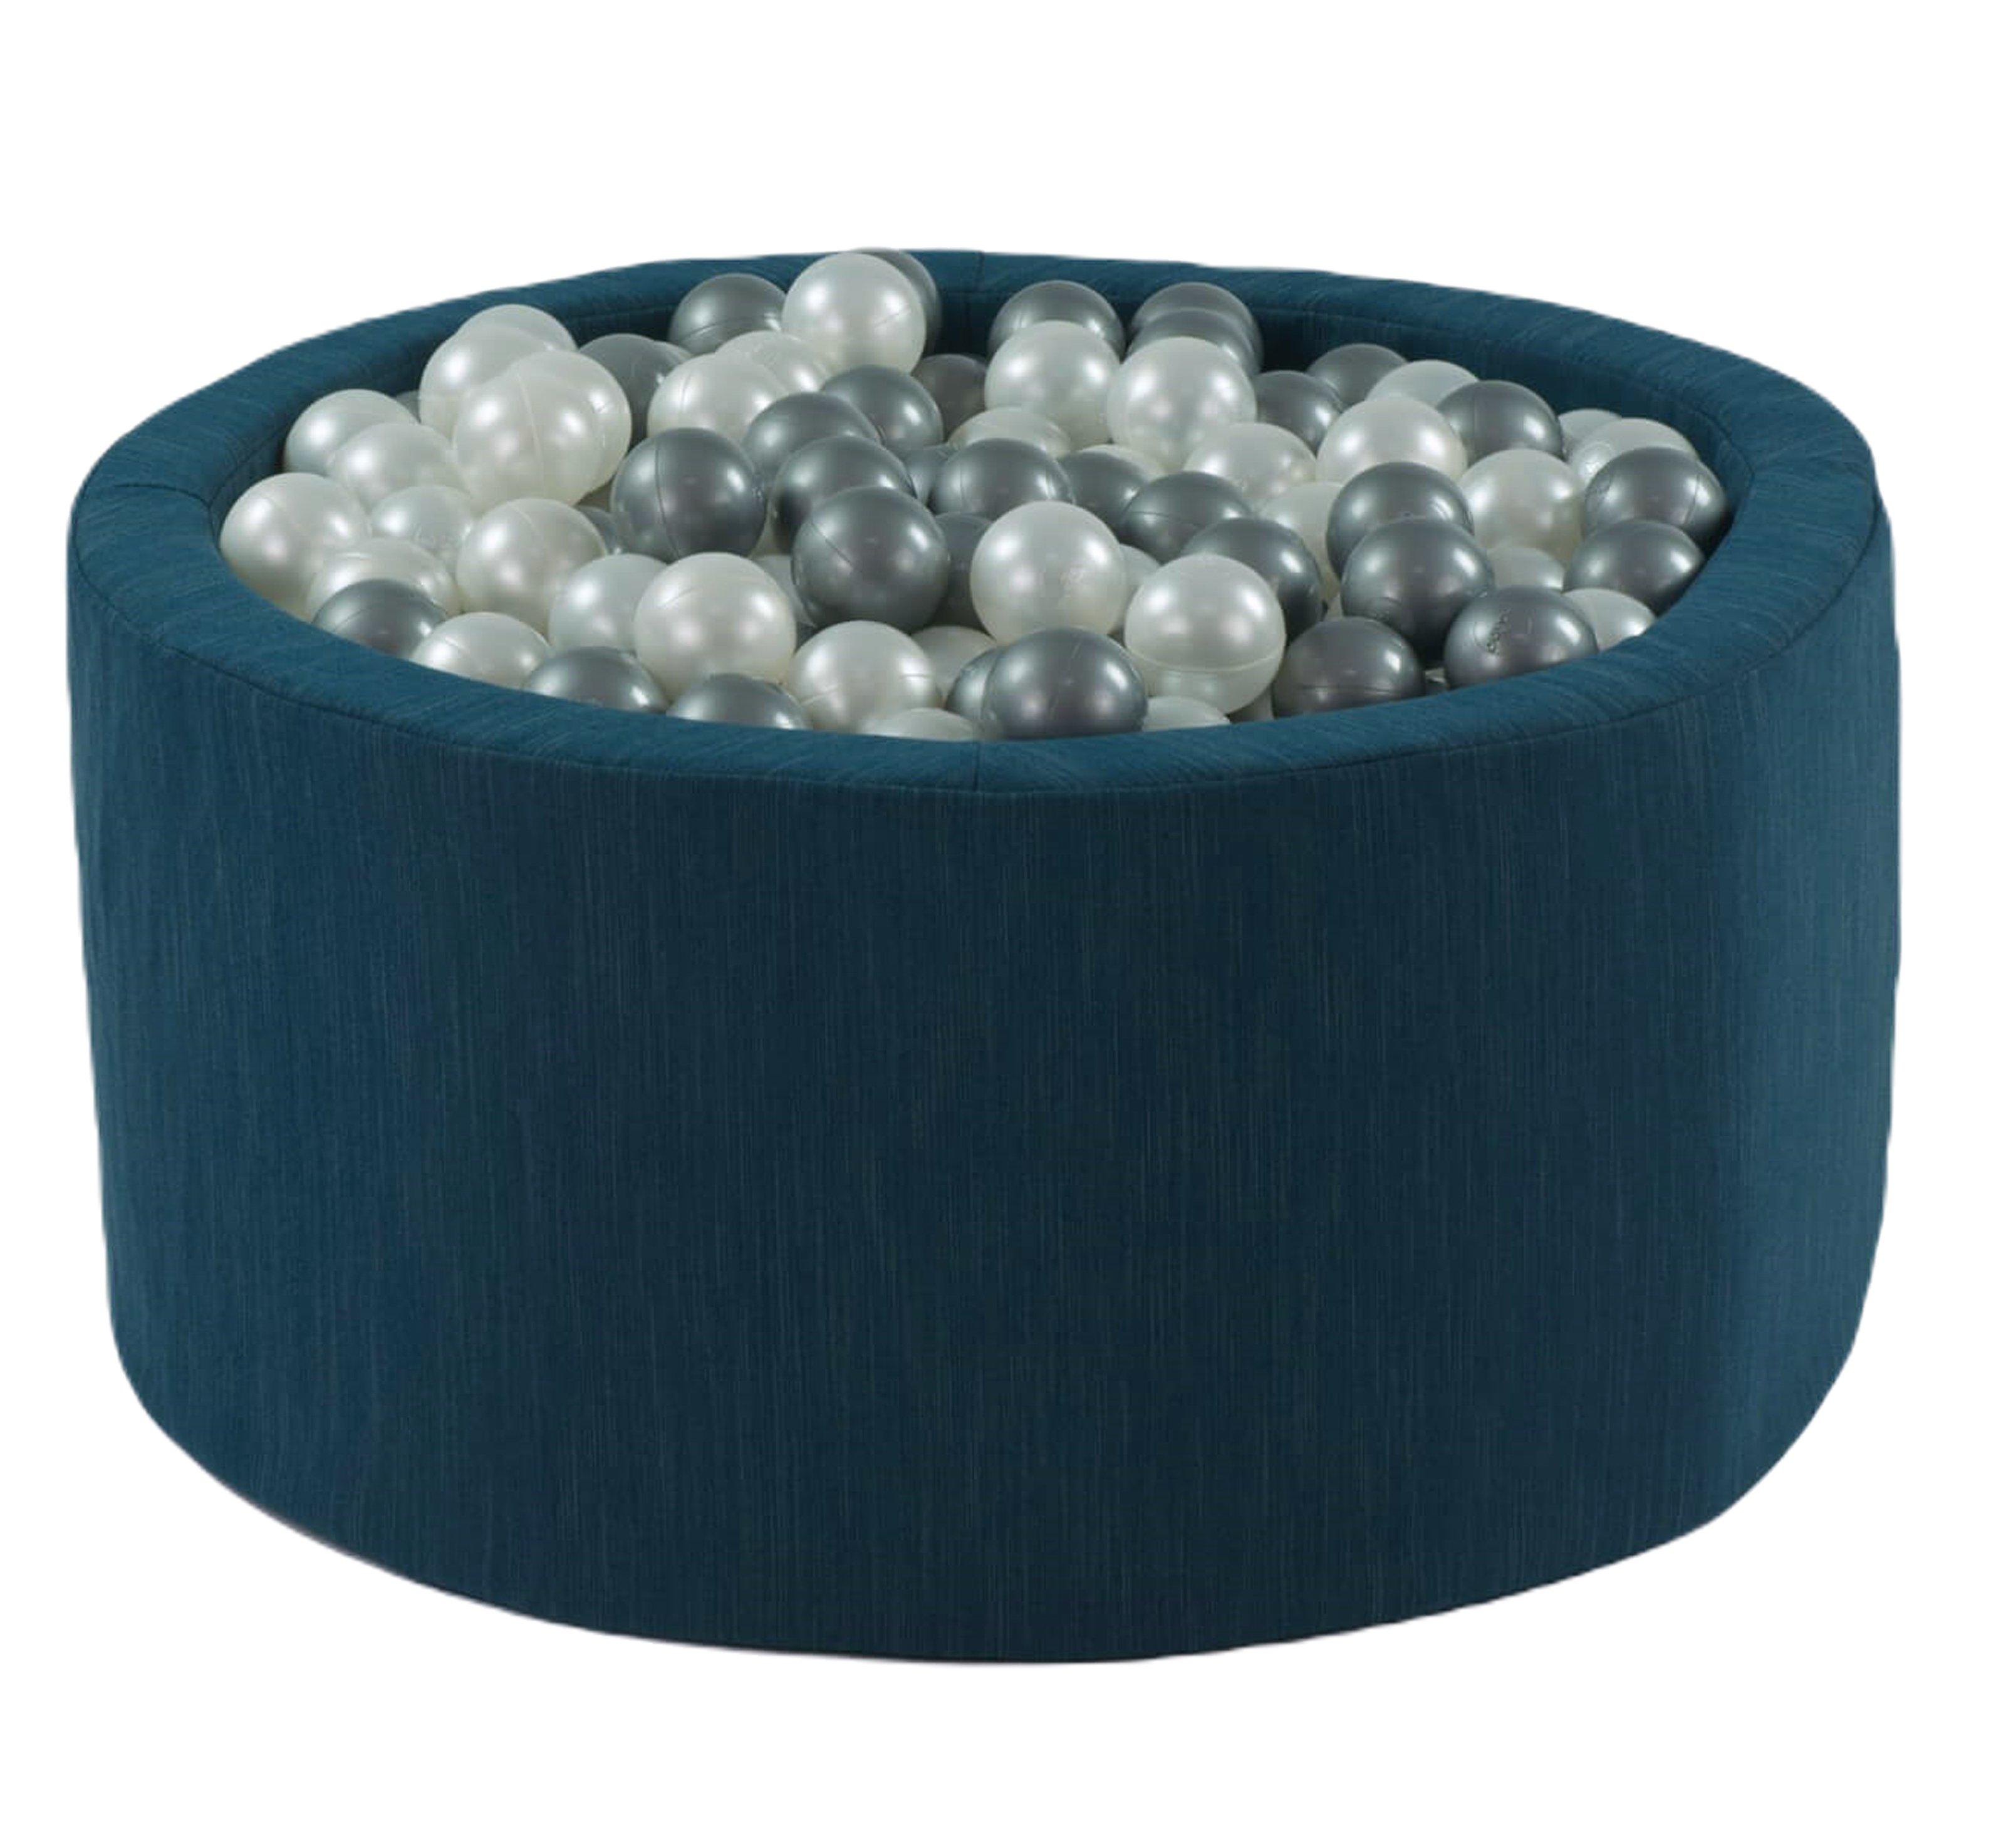 Misioo - Eco Ball Pit Navy Blue + 200 Balls